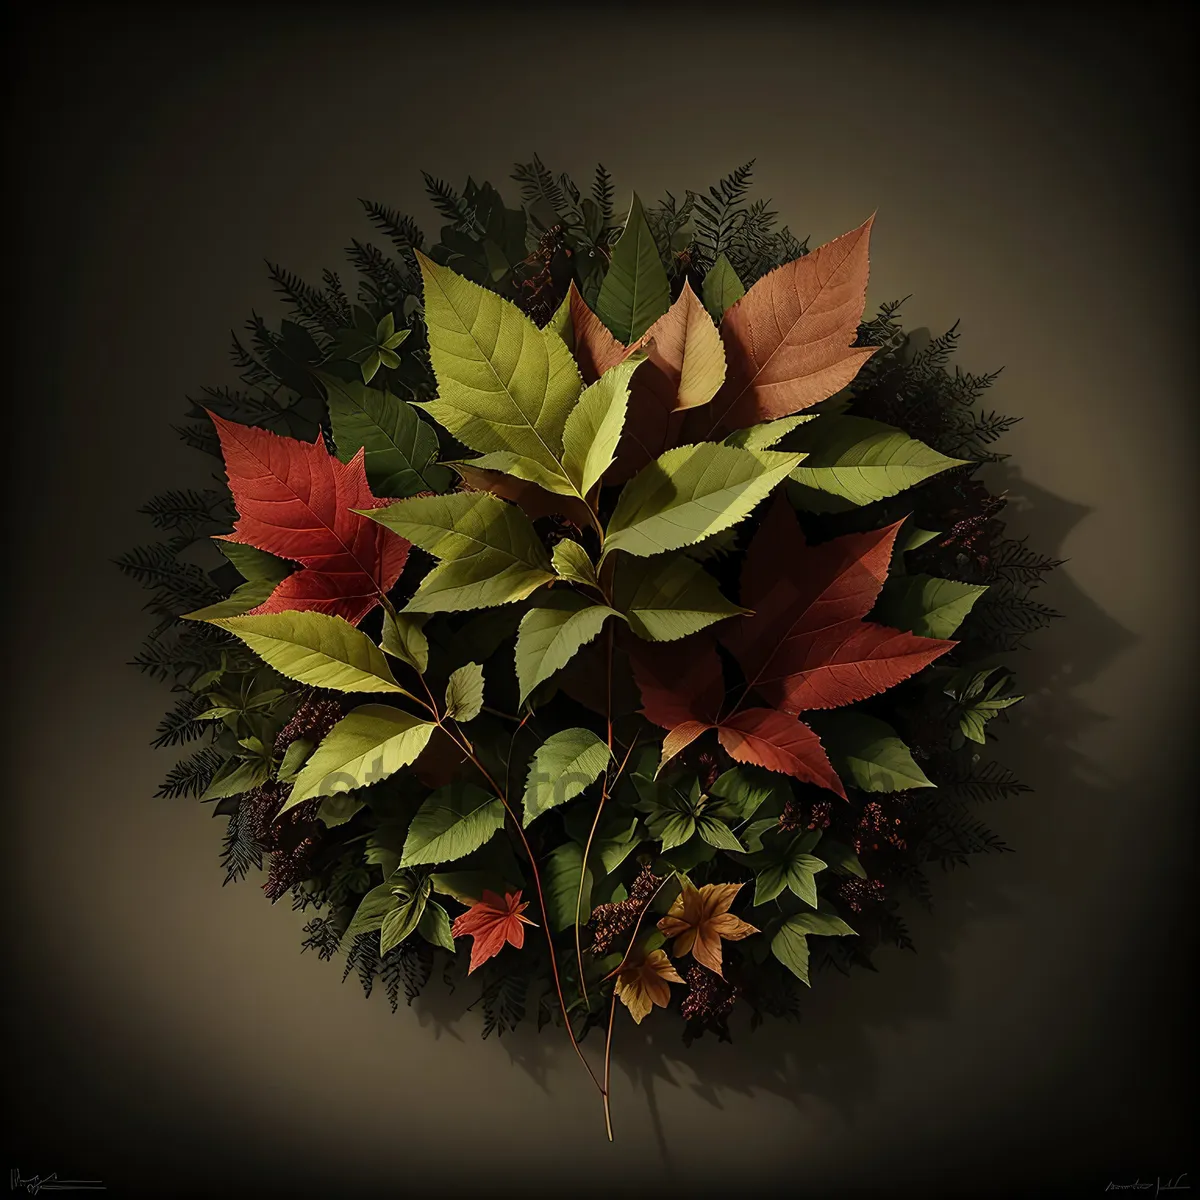 Picture of Seasonal Evergreen Holly Tree Decoration with Maple Leaves